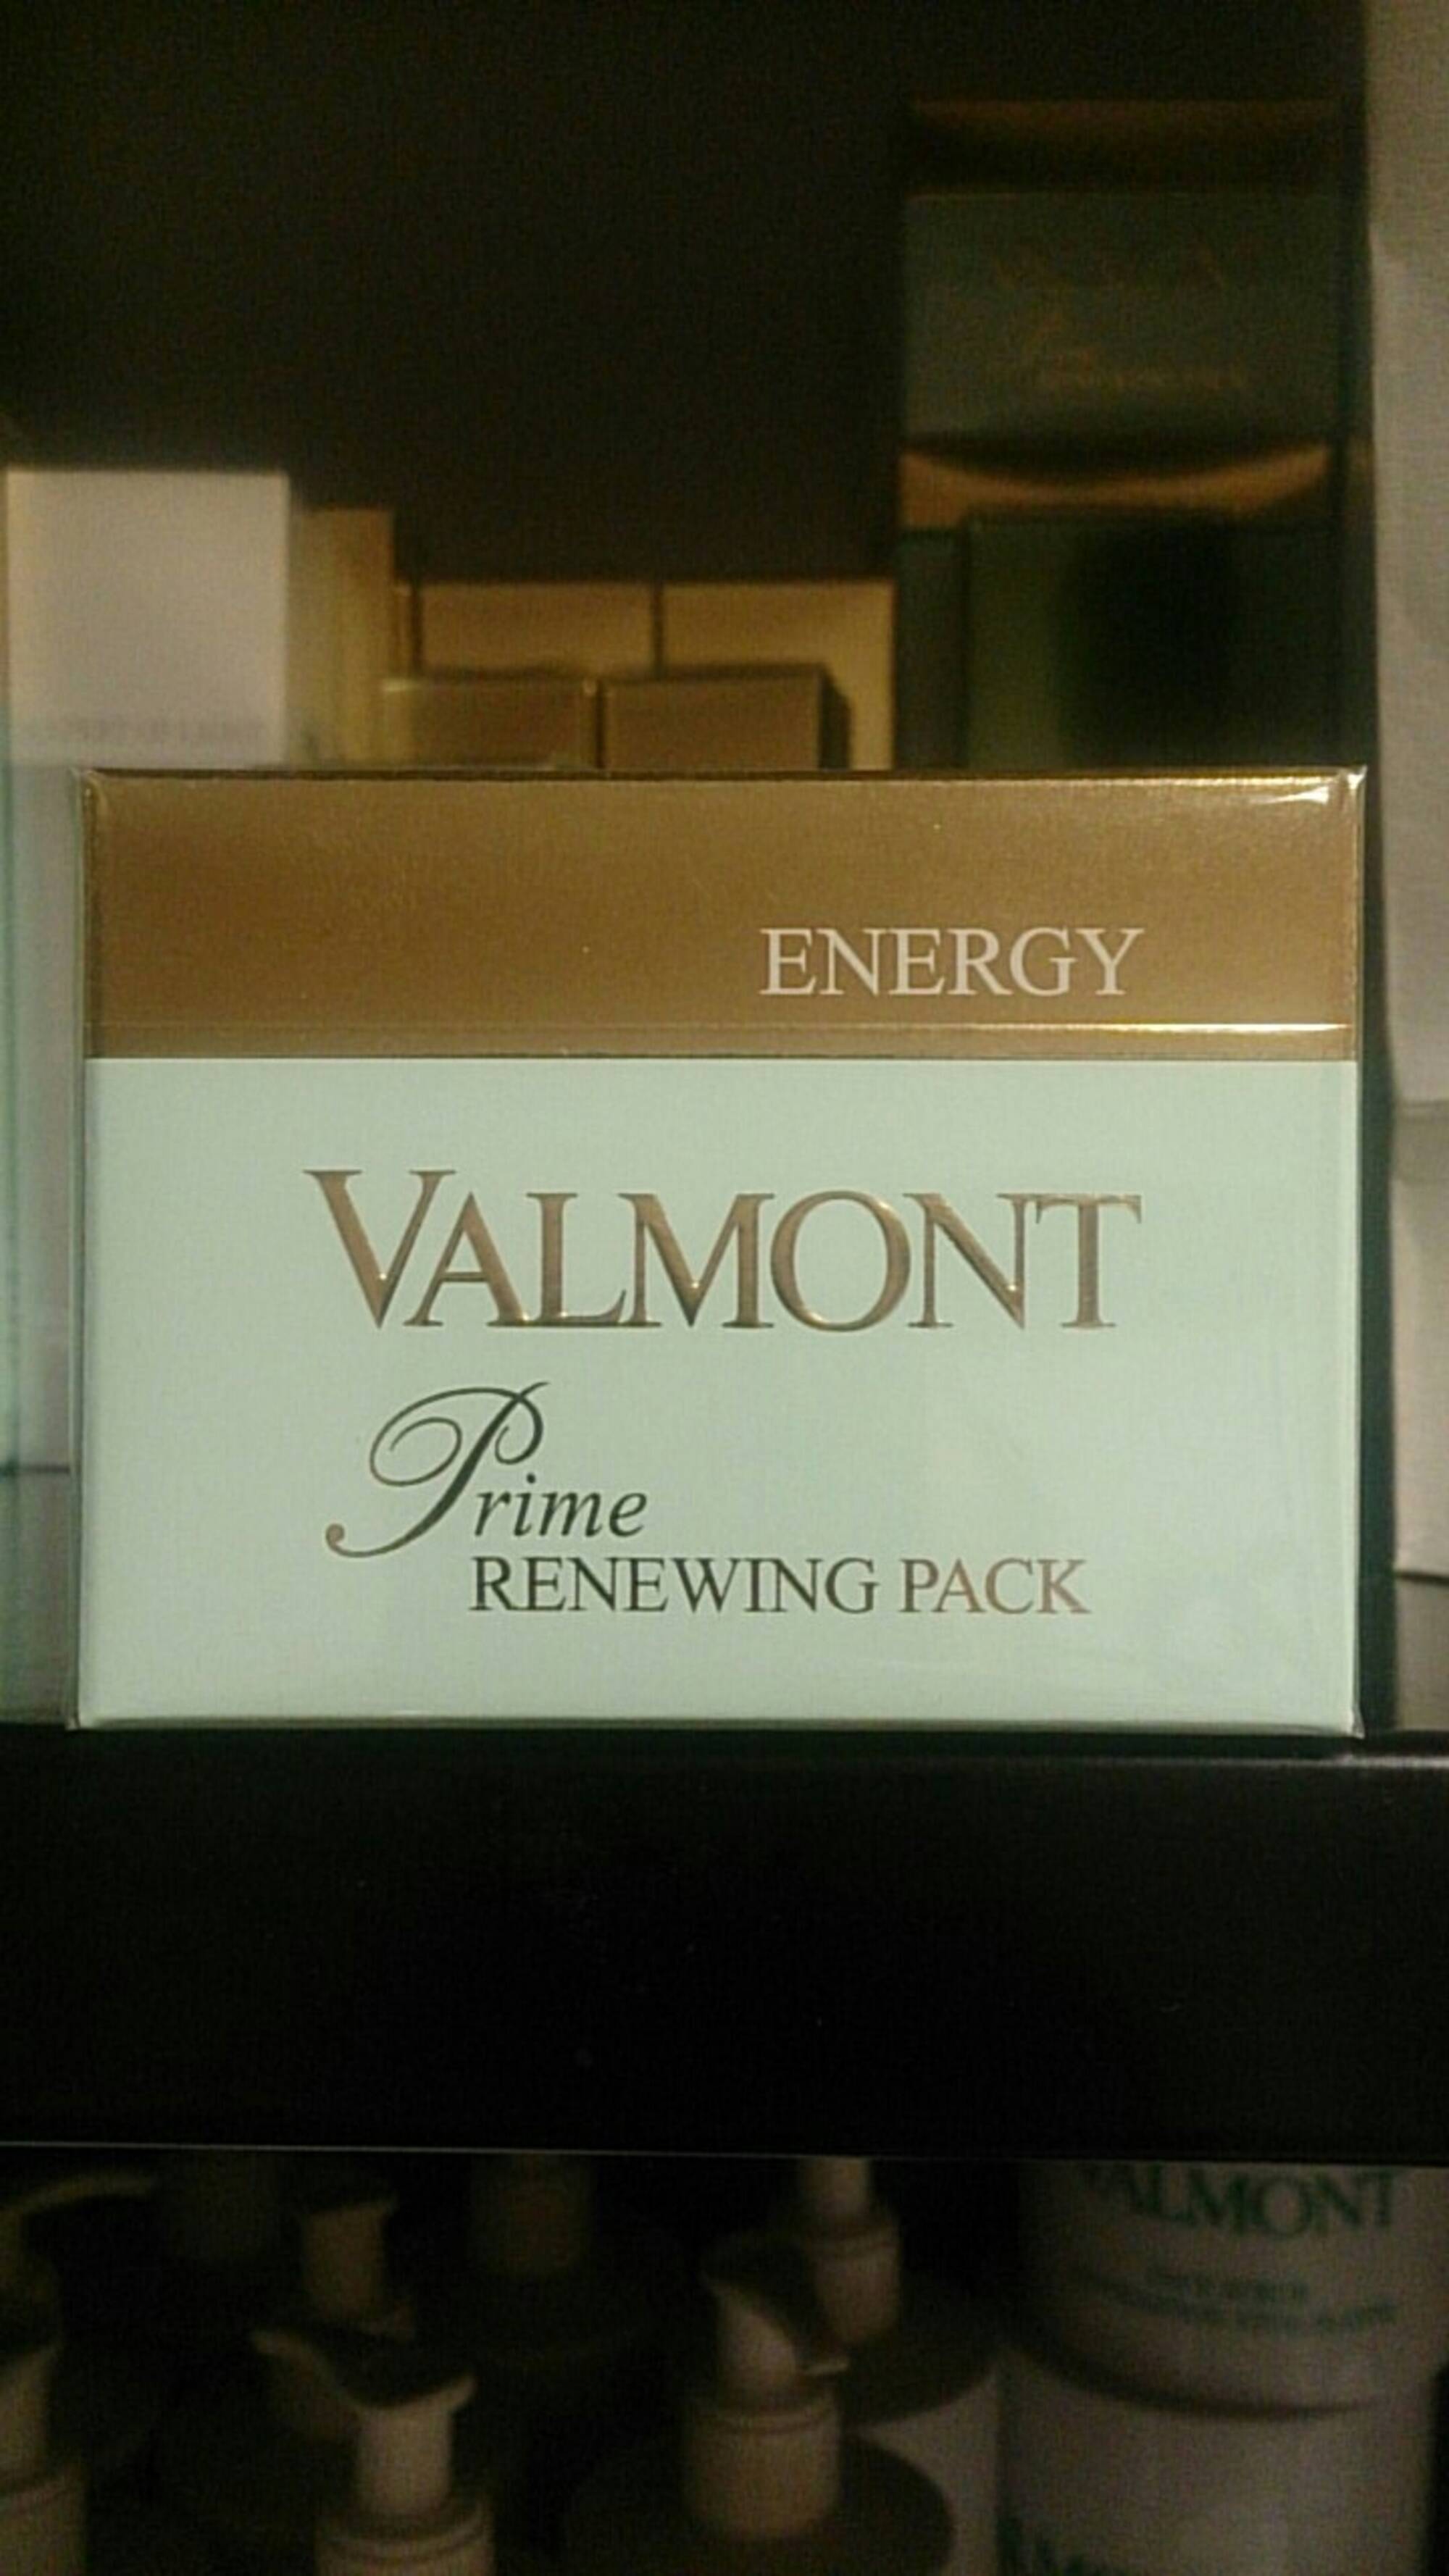 VALMONT - Prime renewing pack